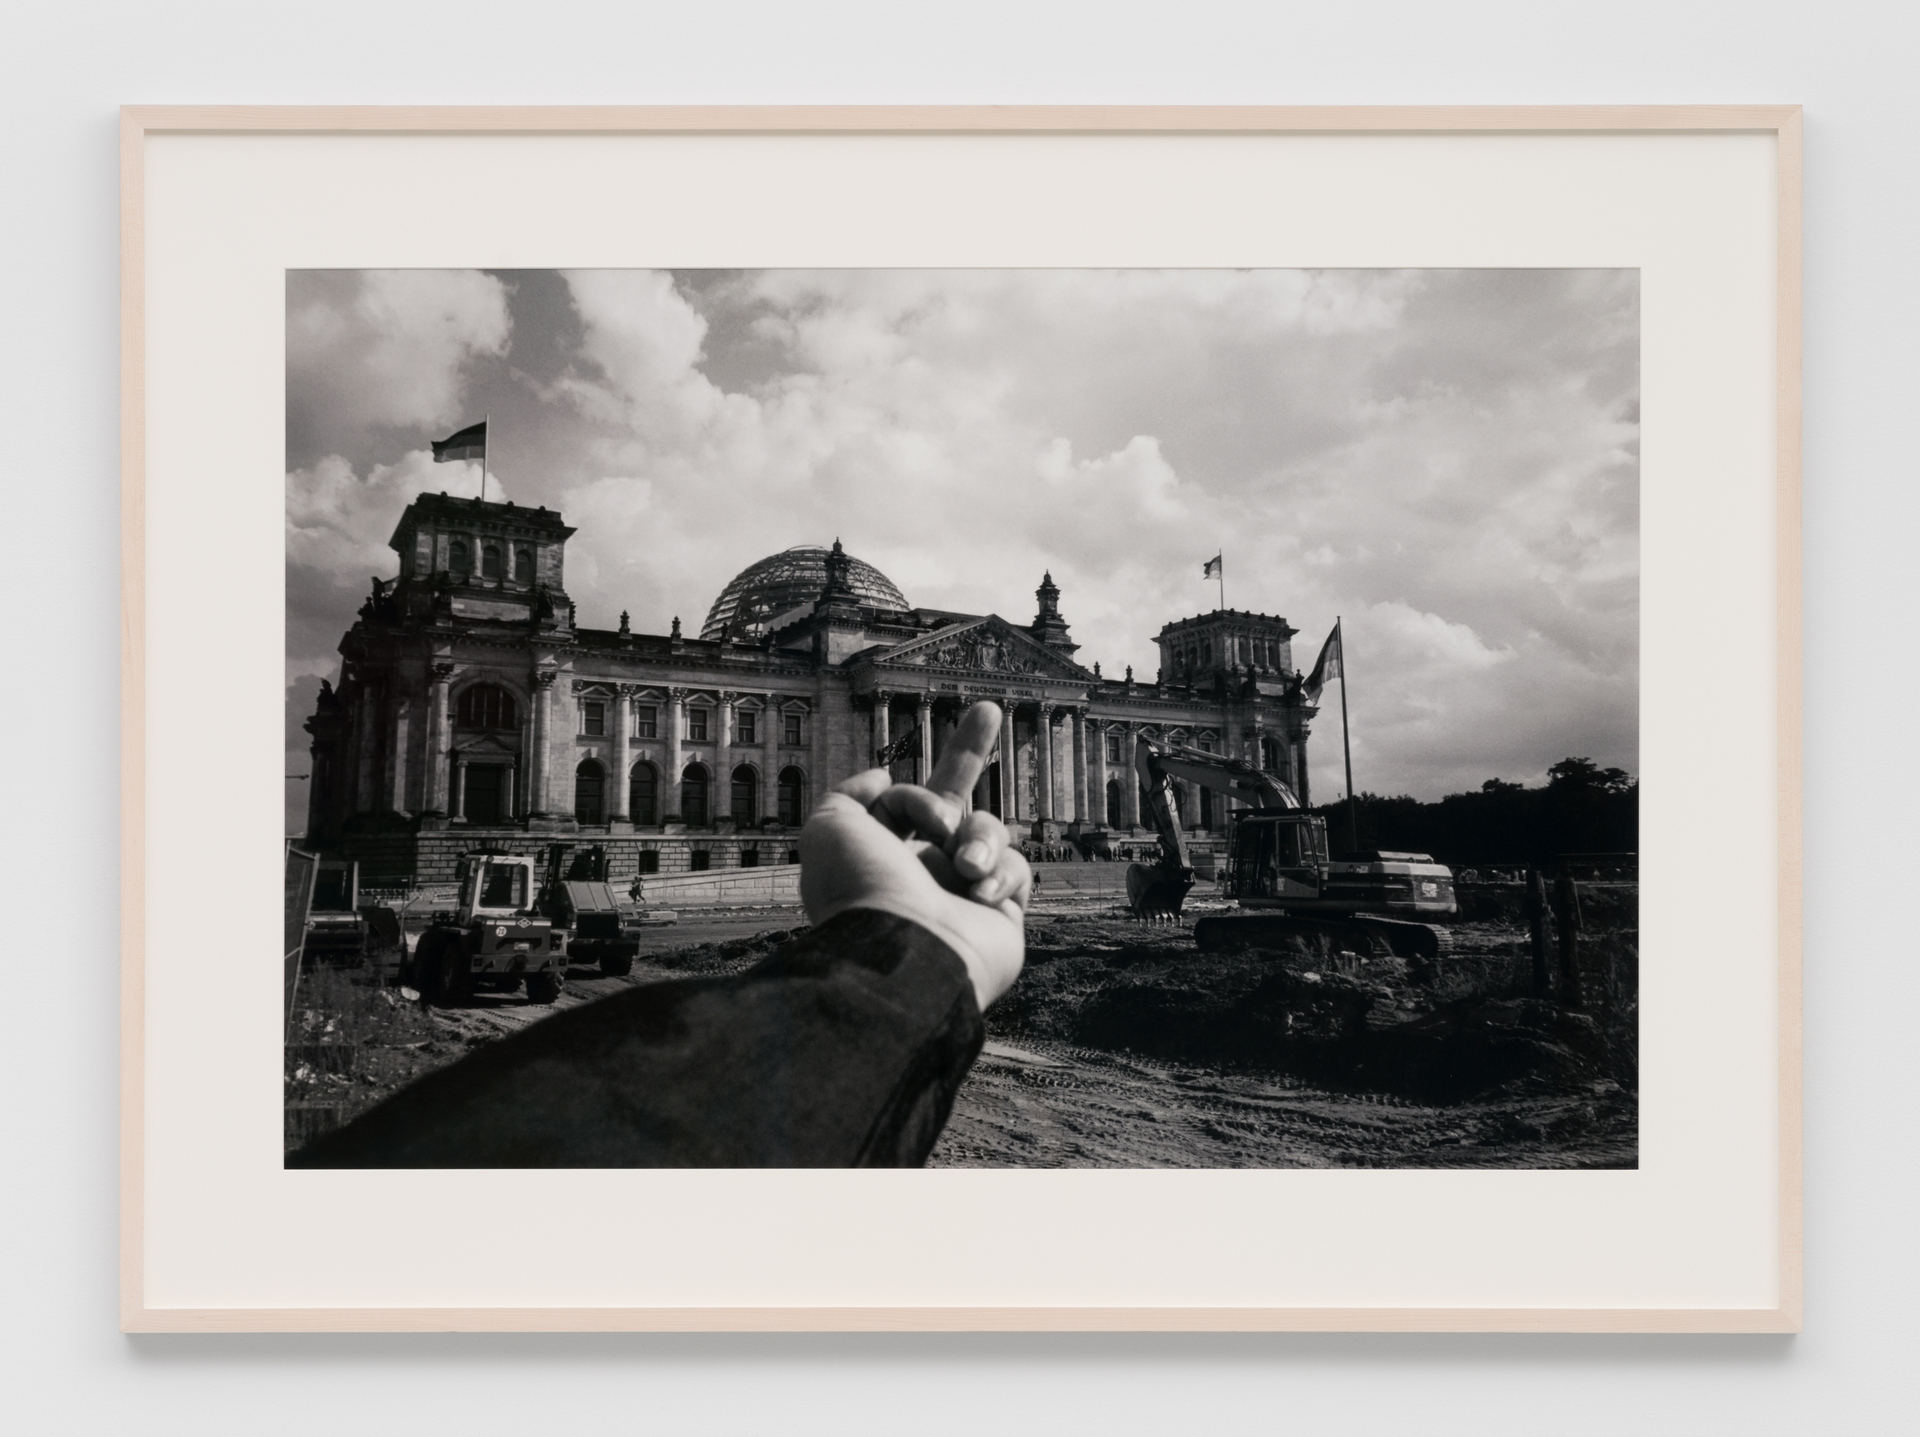 AiWeiwei-StudyofPerspective-Reichstag-1999-Black and White Print-127x89,9cm